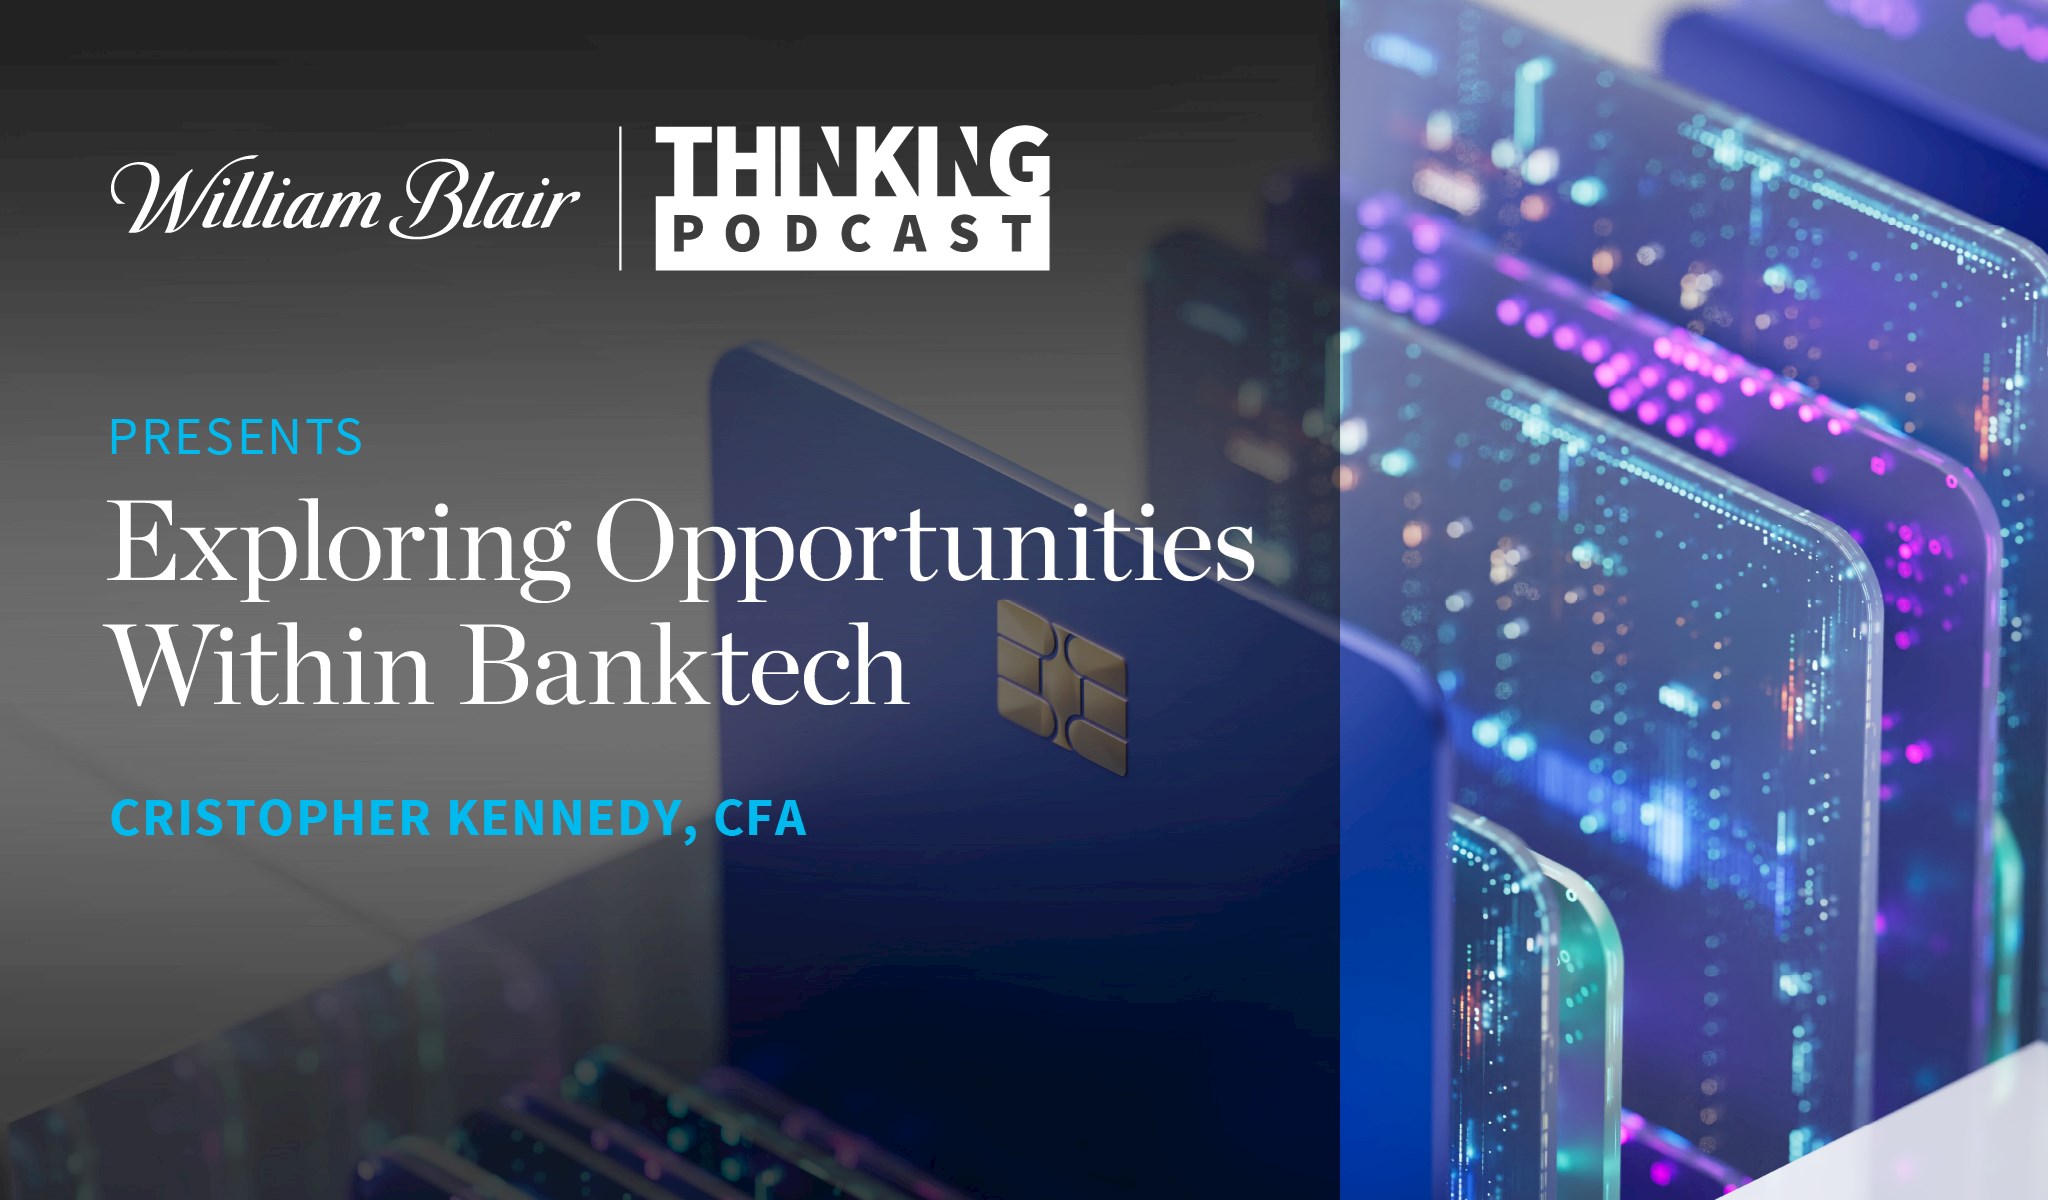 William Blair's Thinking Podcast Presents: Exploring Opportunities Within BankTech, by: Christopher Kennedy, CFA